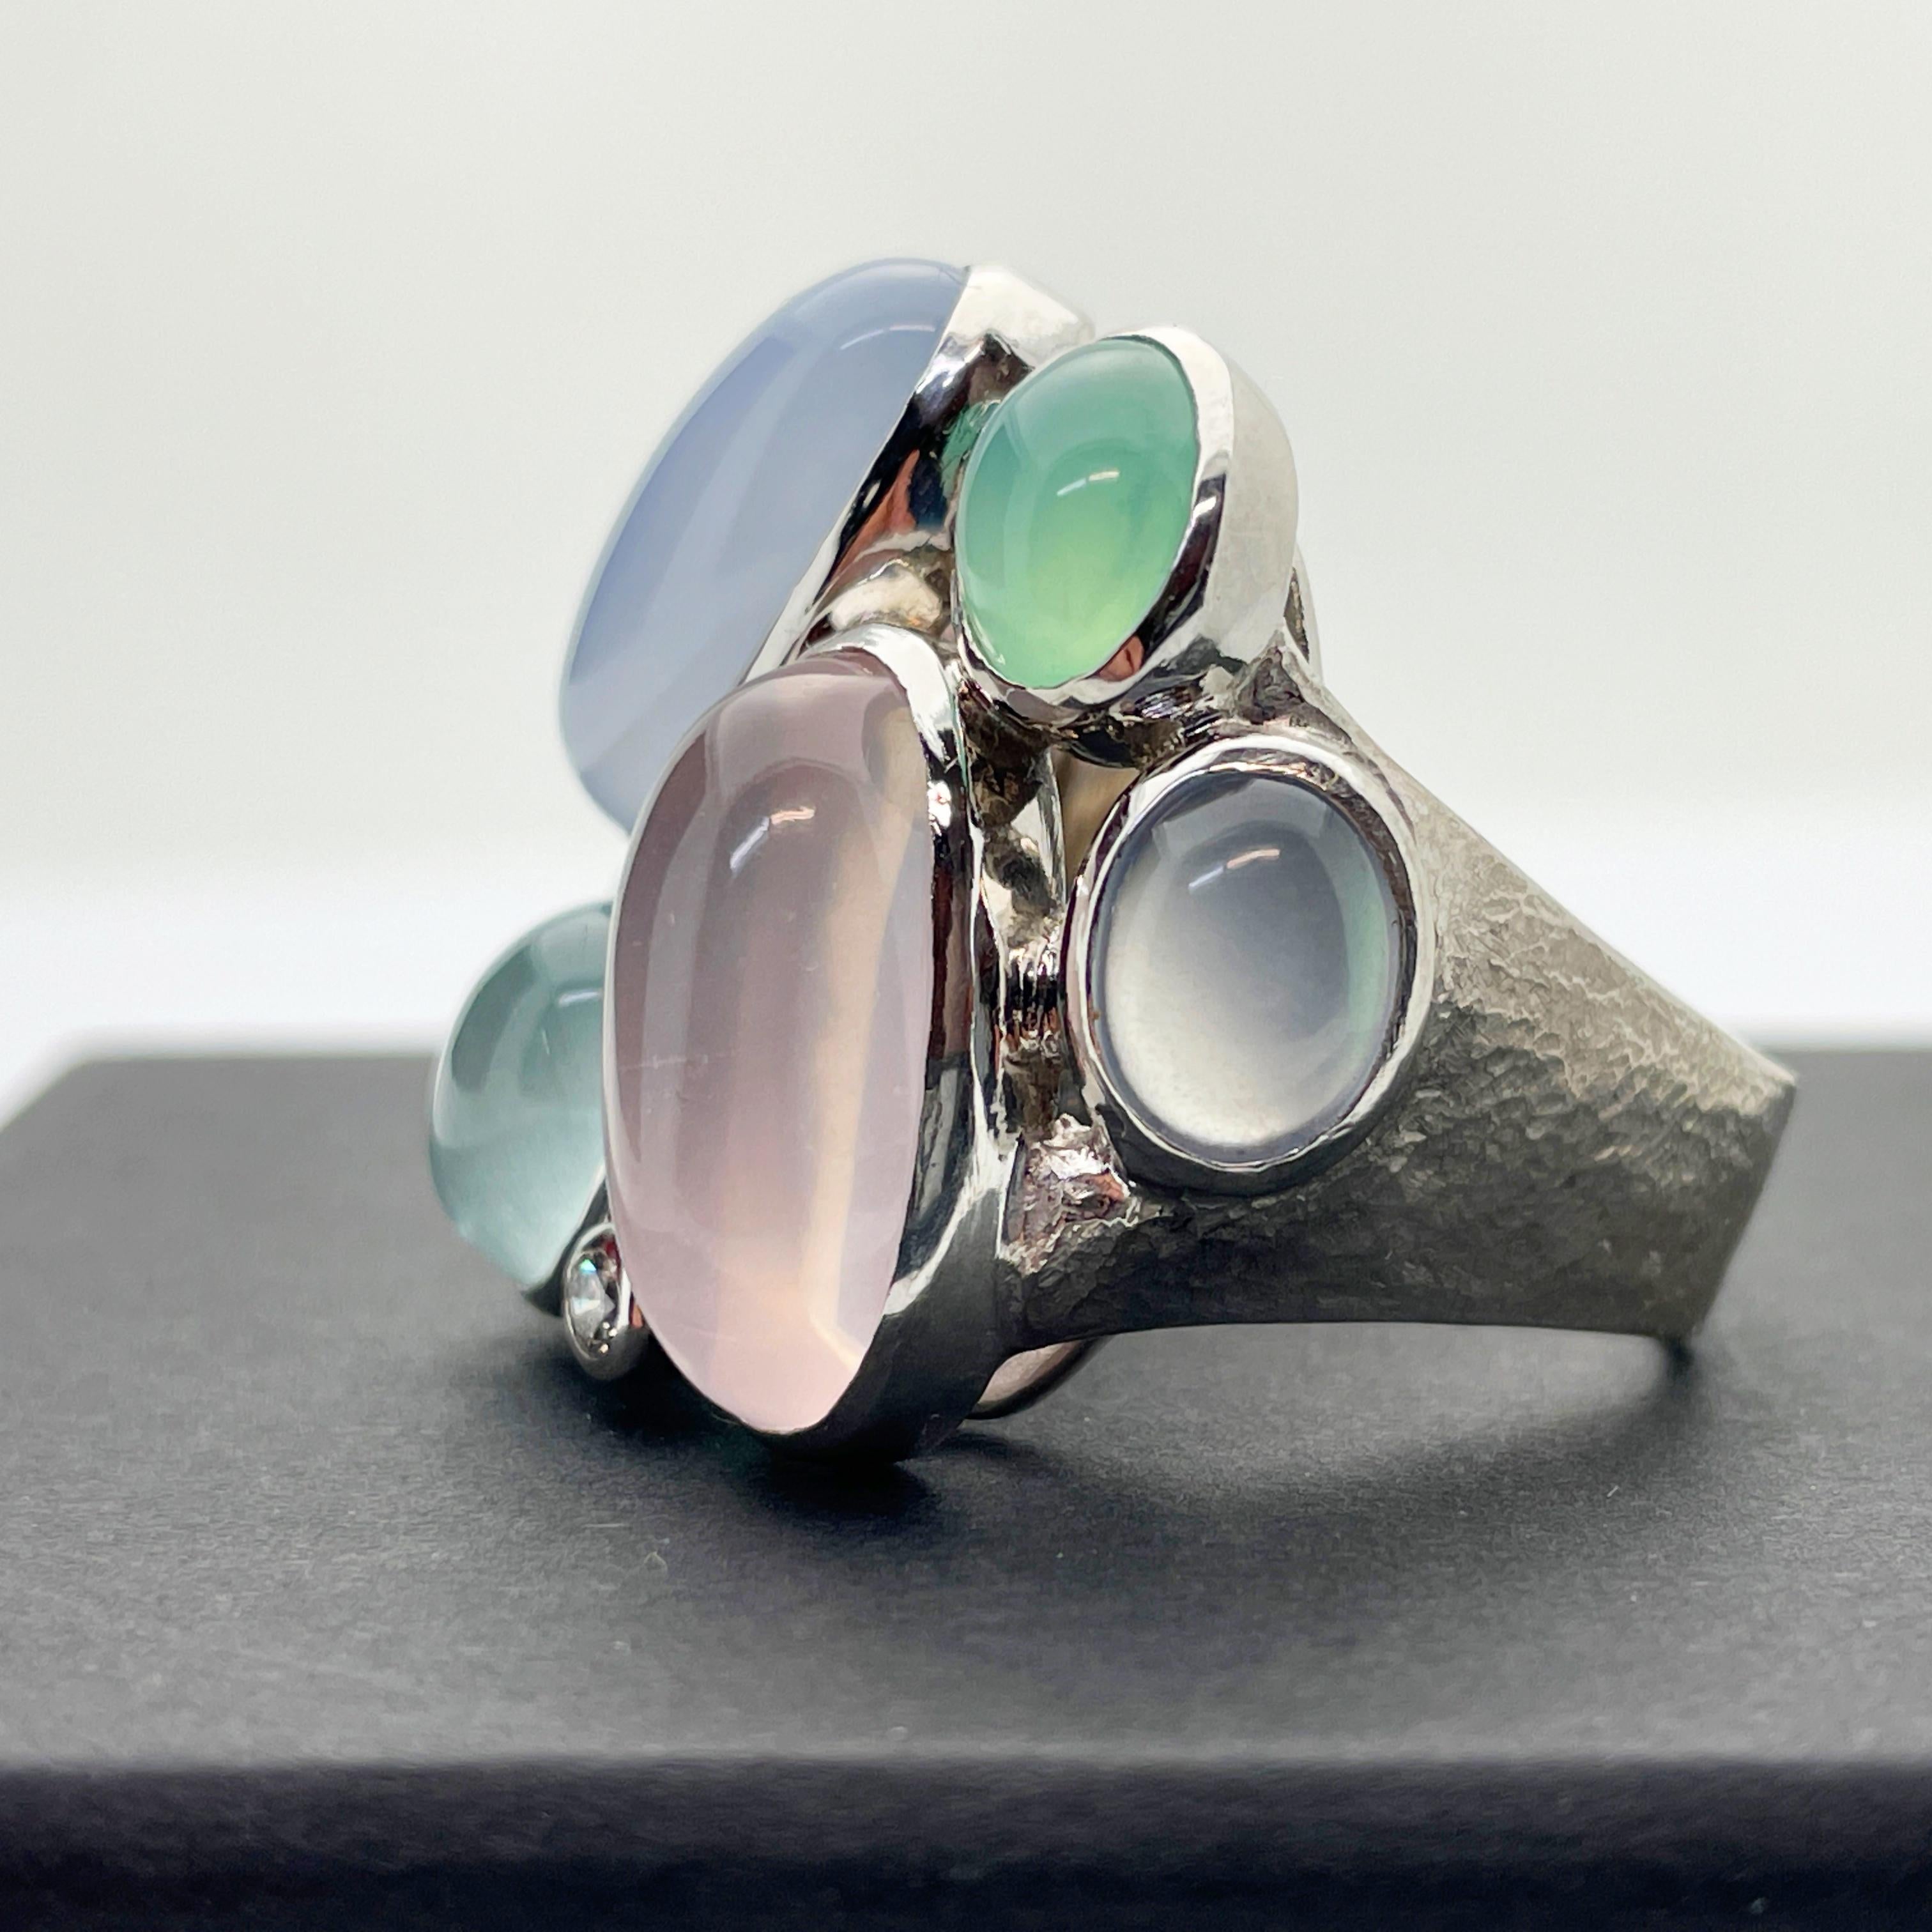 Here is a beautiful and substantial 18k White Gold Custom Chalcedony and Diamond Cluster Ring.

This ring features 7 x oval cabochon cut chalcedony stones ranging in colour from slight violetish blue, green and pink. Also included are 2 x 0.04ct